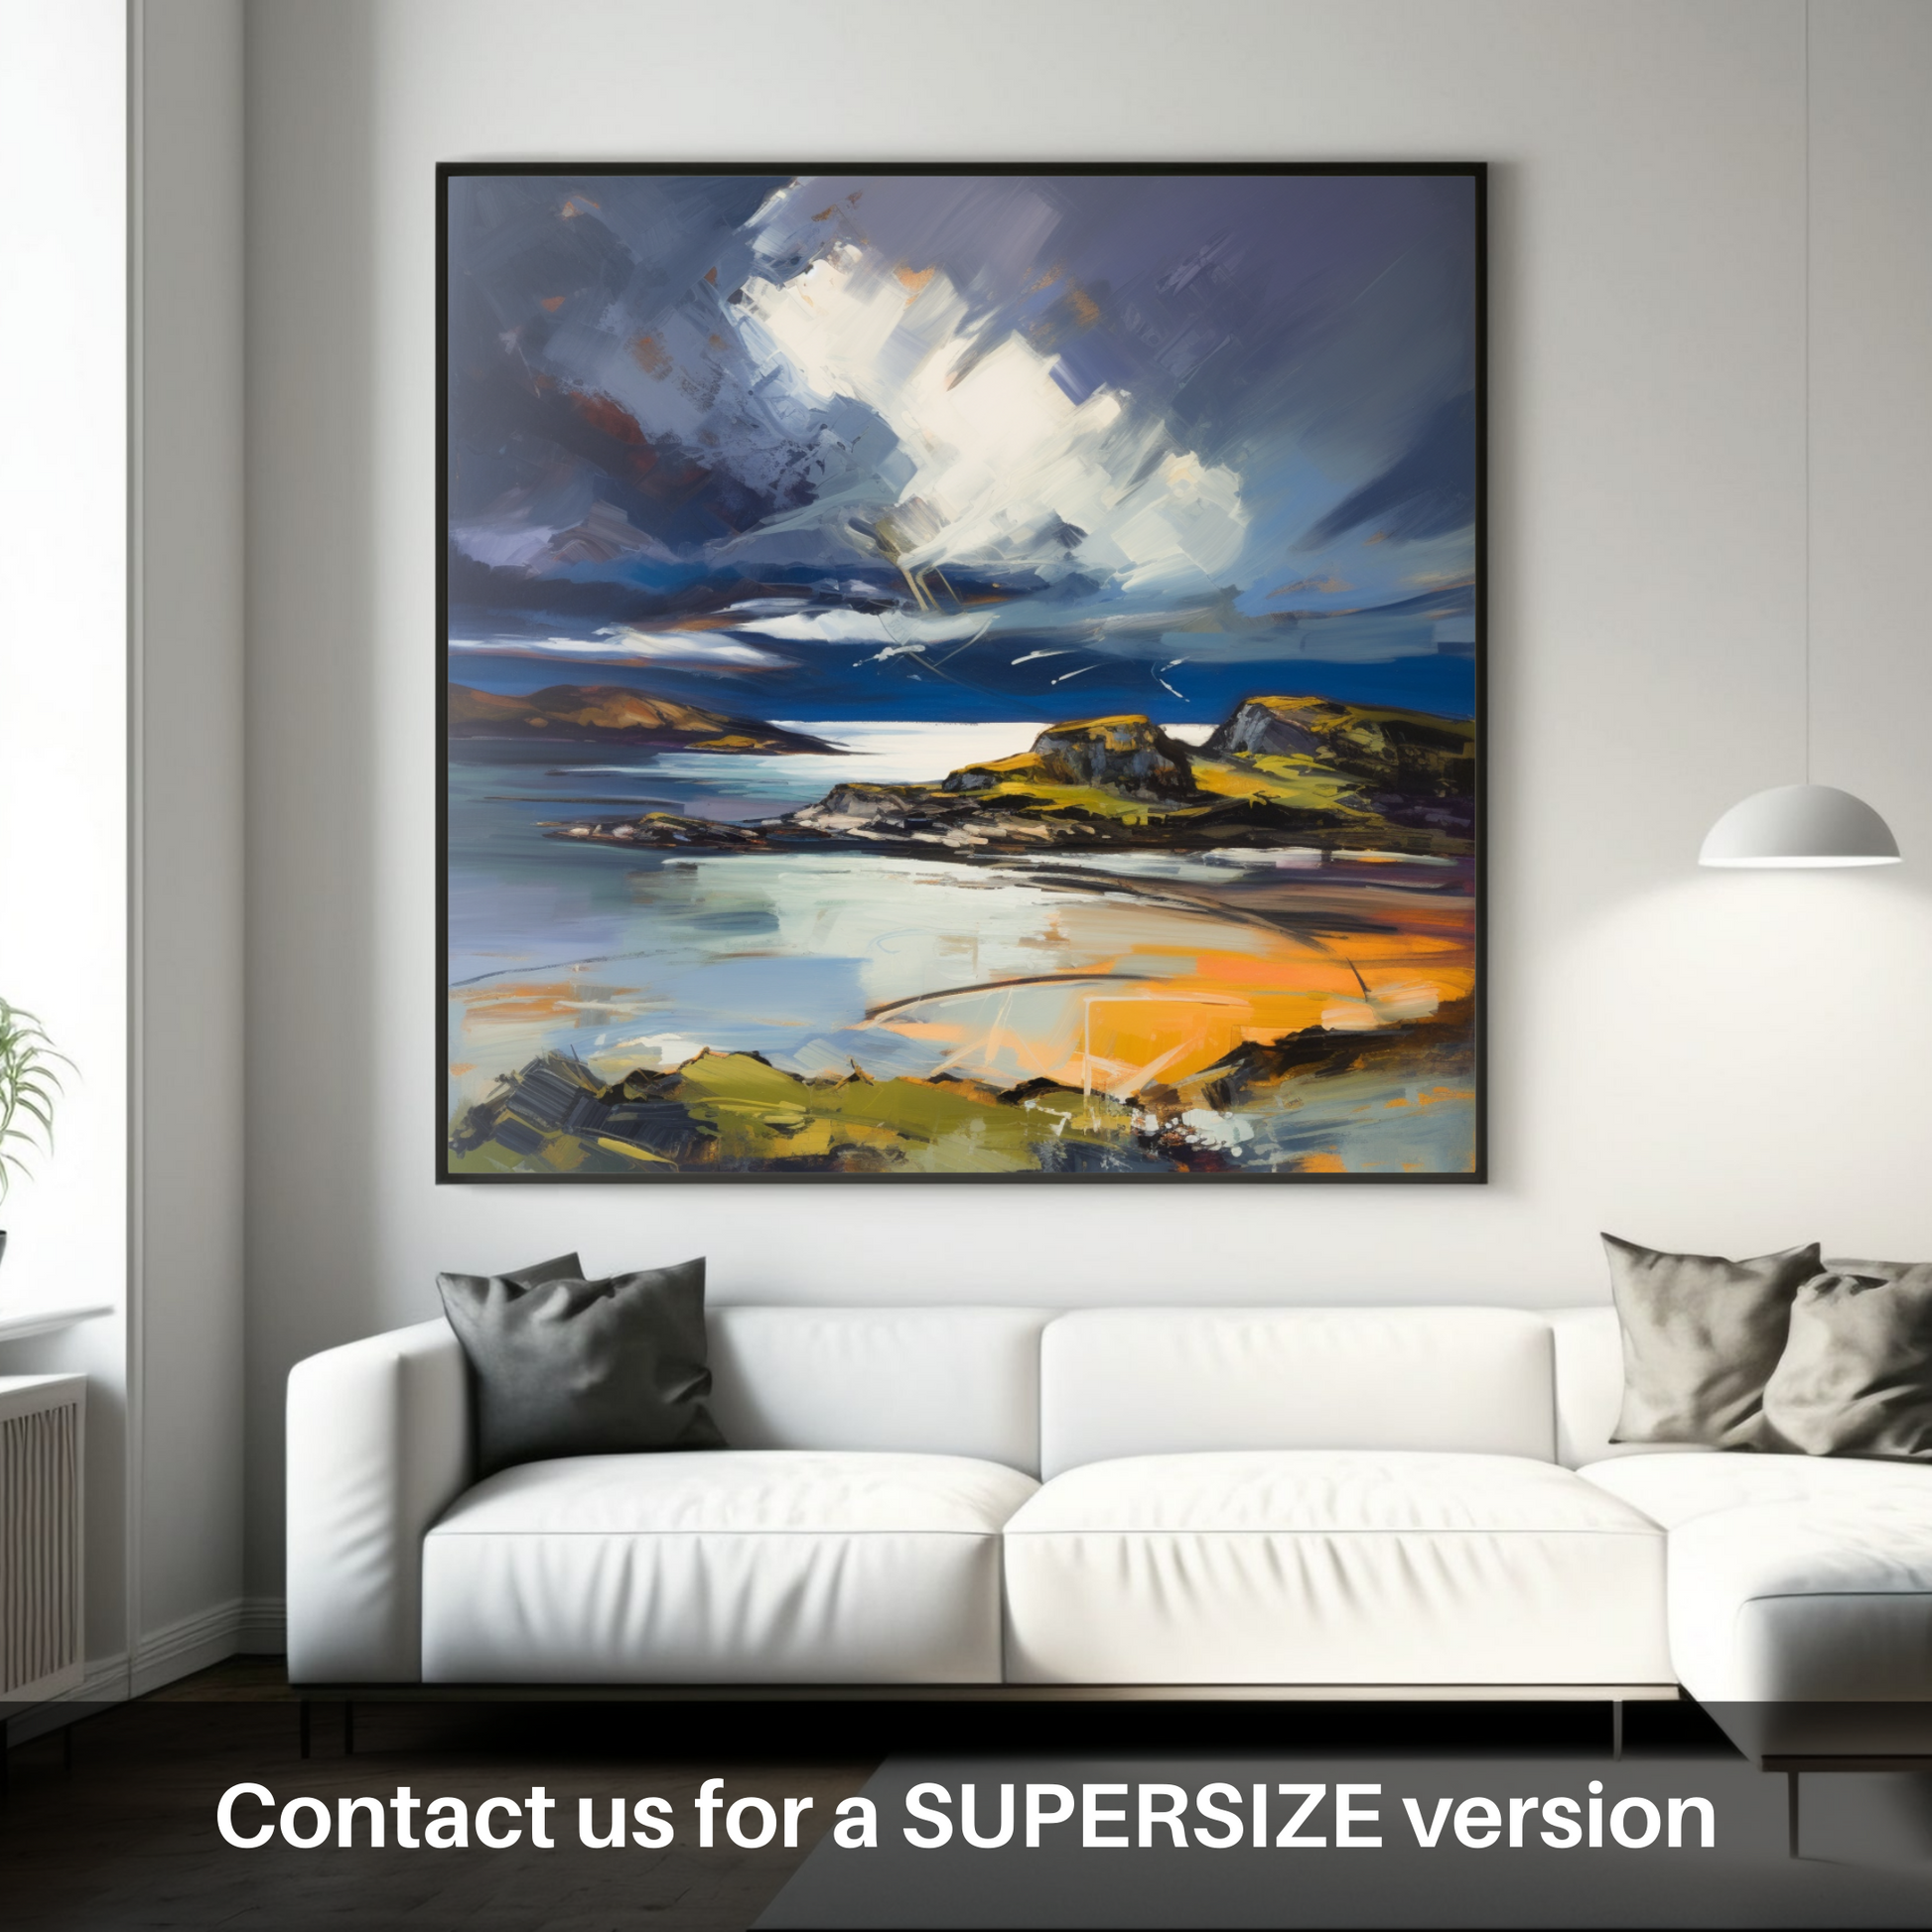 Huge supersize print of Lochinver Bay with a stormy sky